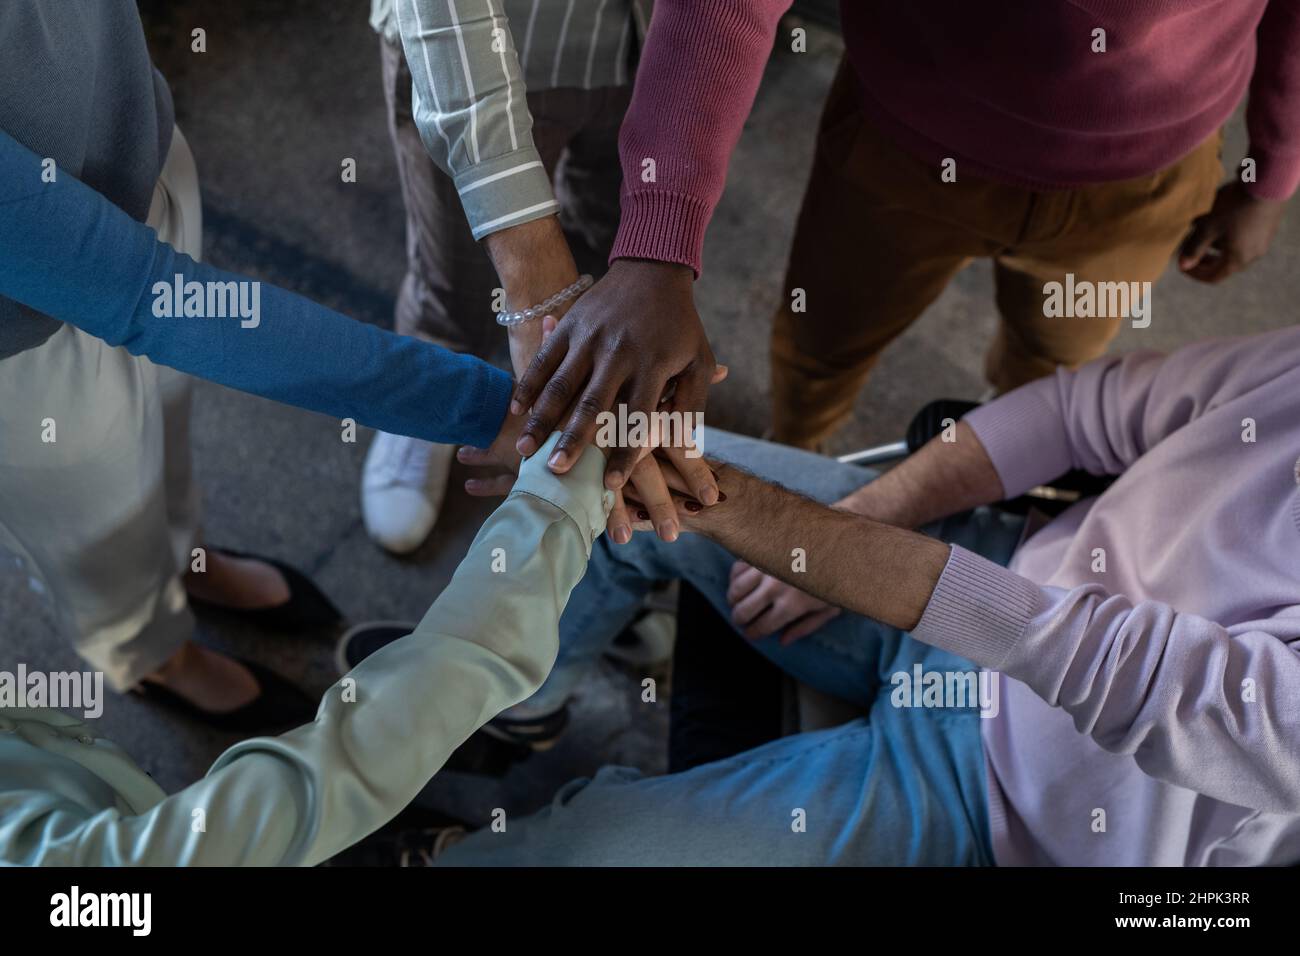 Above angle of pile of hands of contemporary intercultural employees in smart casualwear standing in front of one another Stock Photo